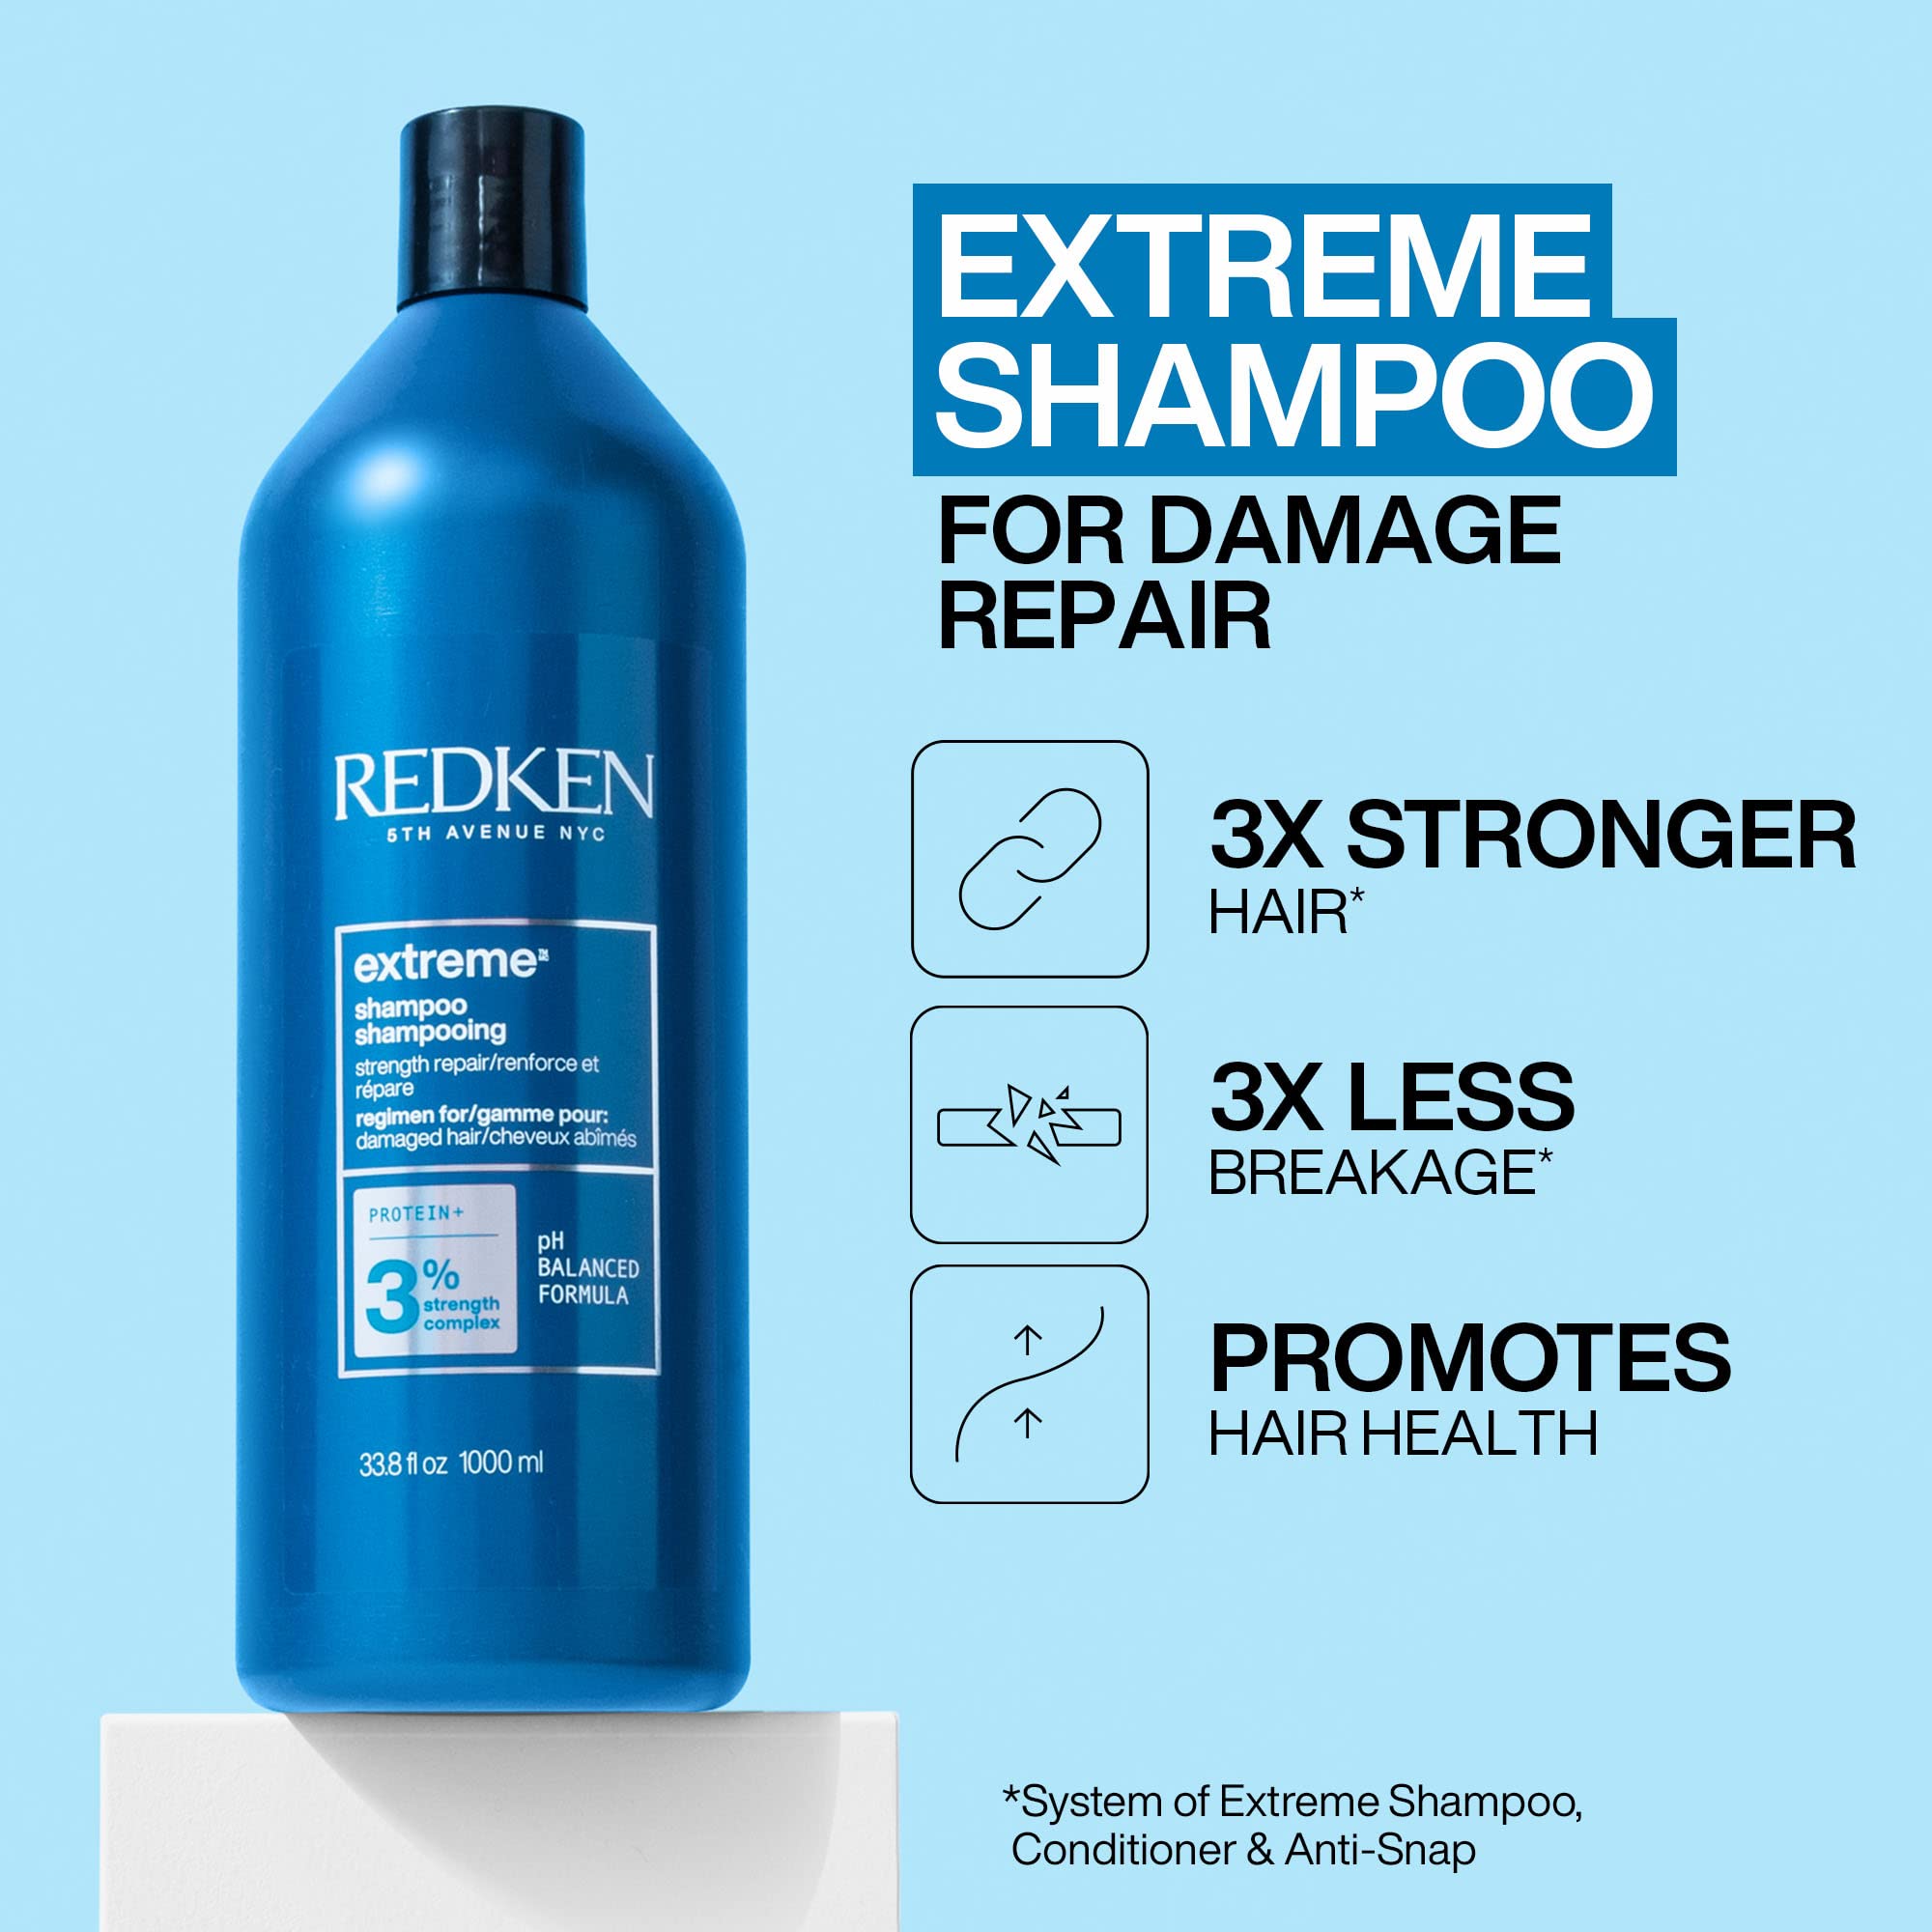 REDKEN Extreme Shampoo & Conditioner Set | Shampoo for Damaged Hair | Hair Strengthen & Repair Damaged Hair | Infused With Proteins